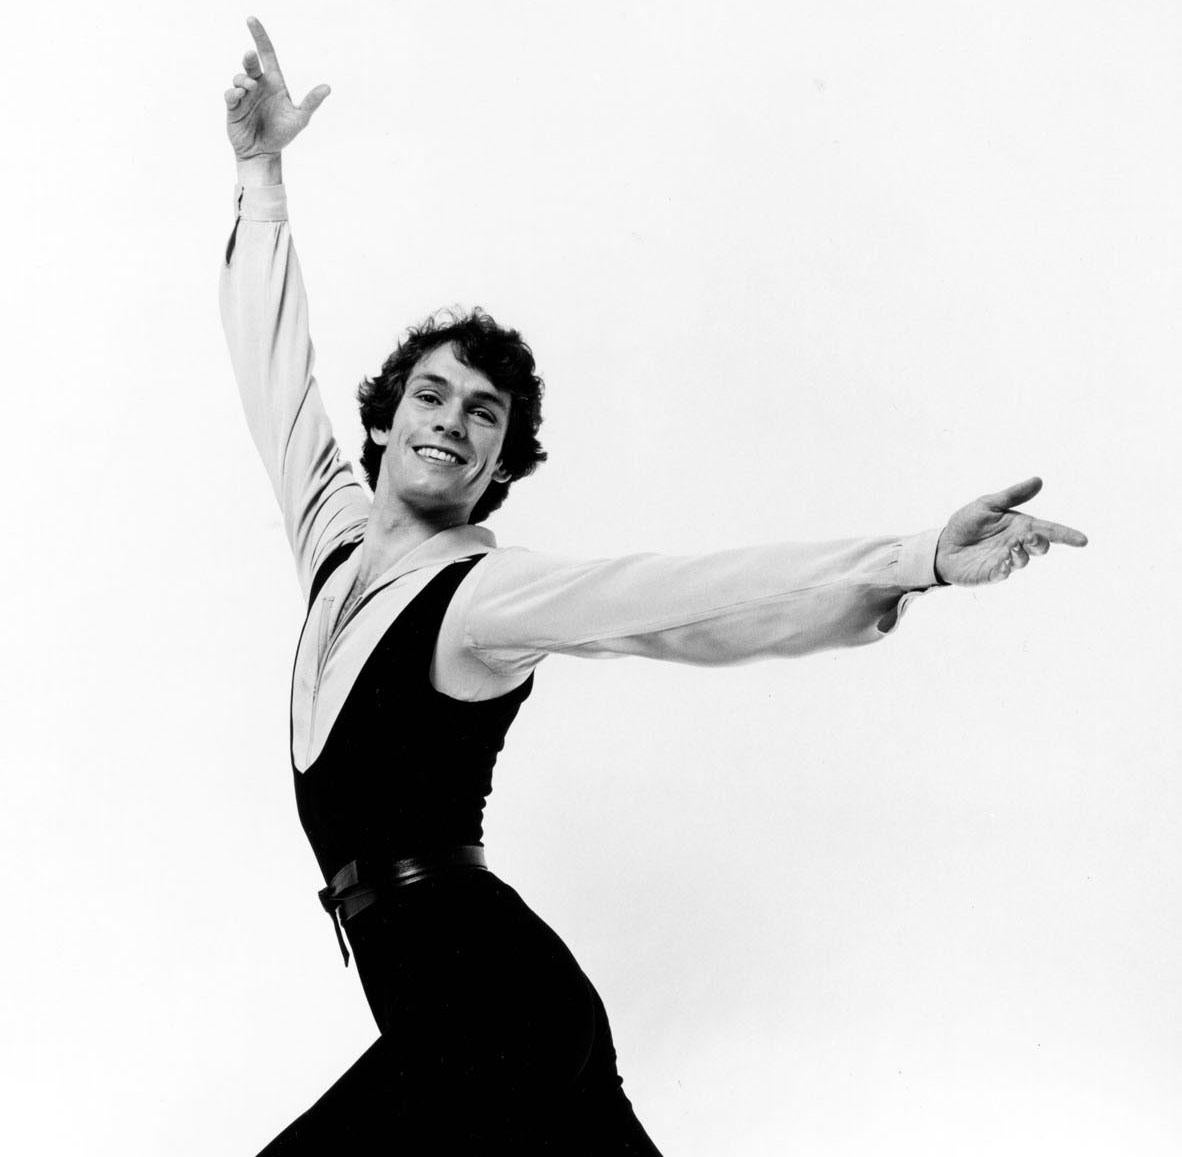 Olympic Gold Medal winning British figure skater John Curry, signed by Mitchell - Photograph by Jack Mitchell